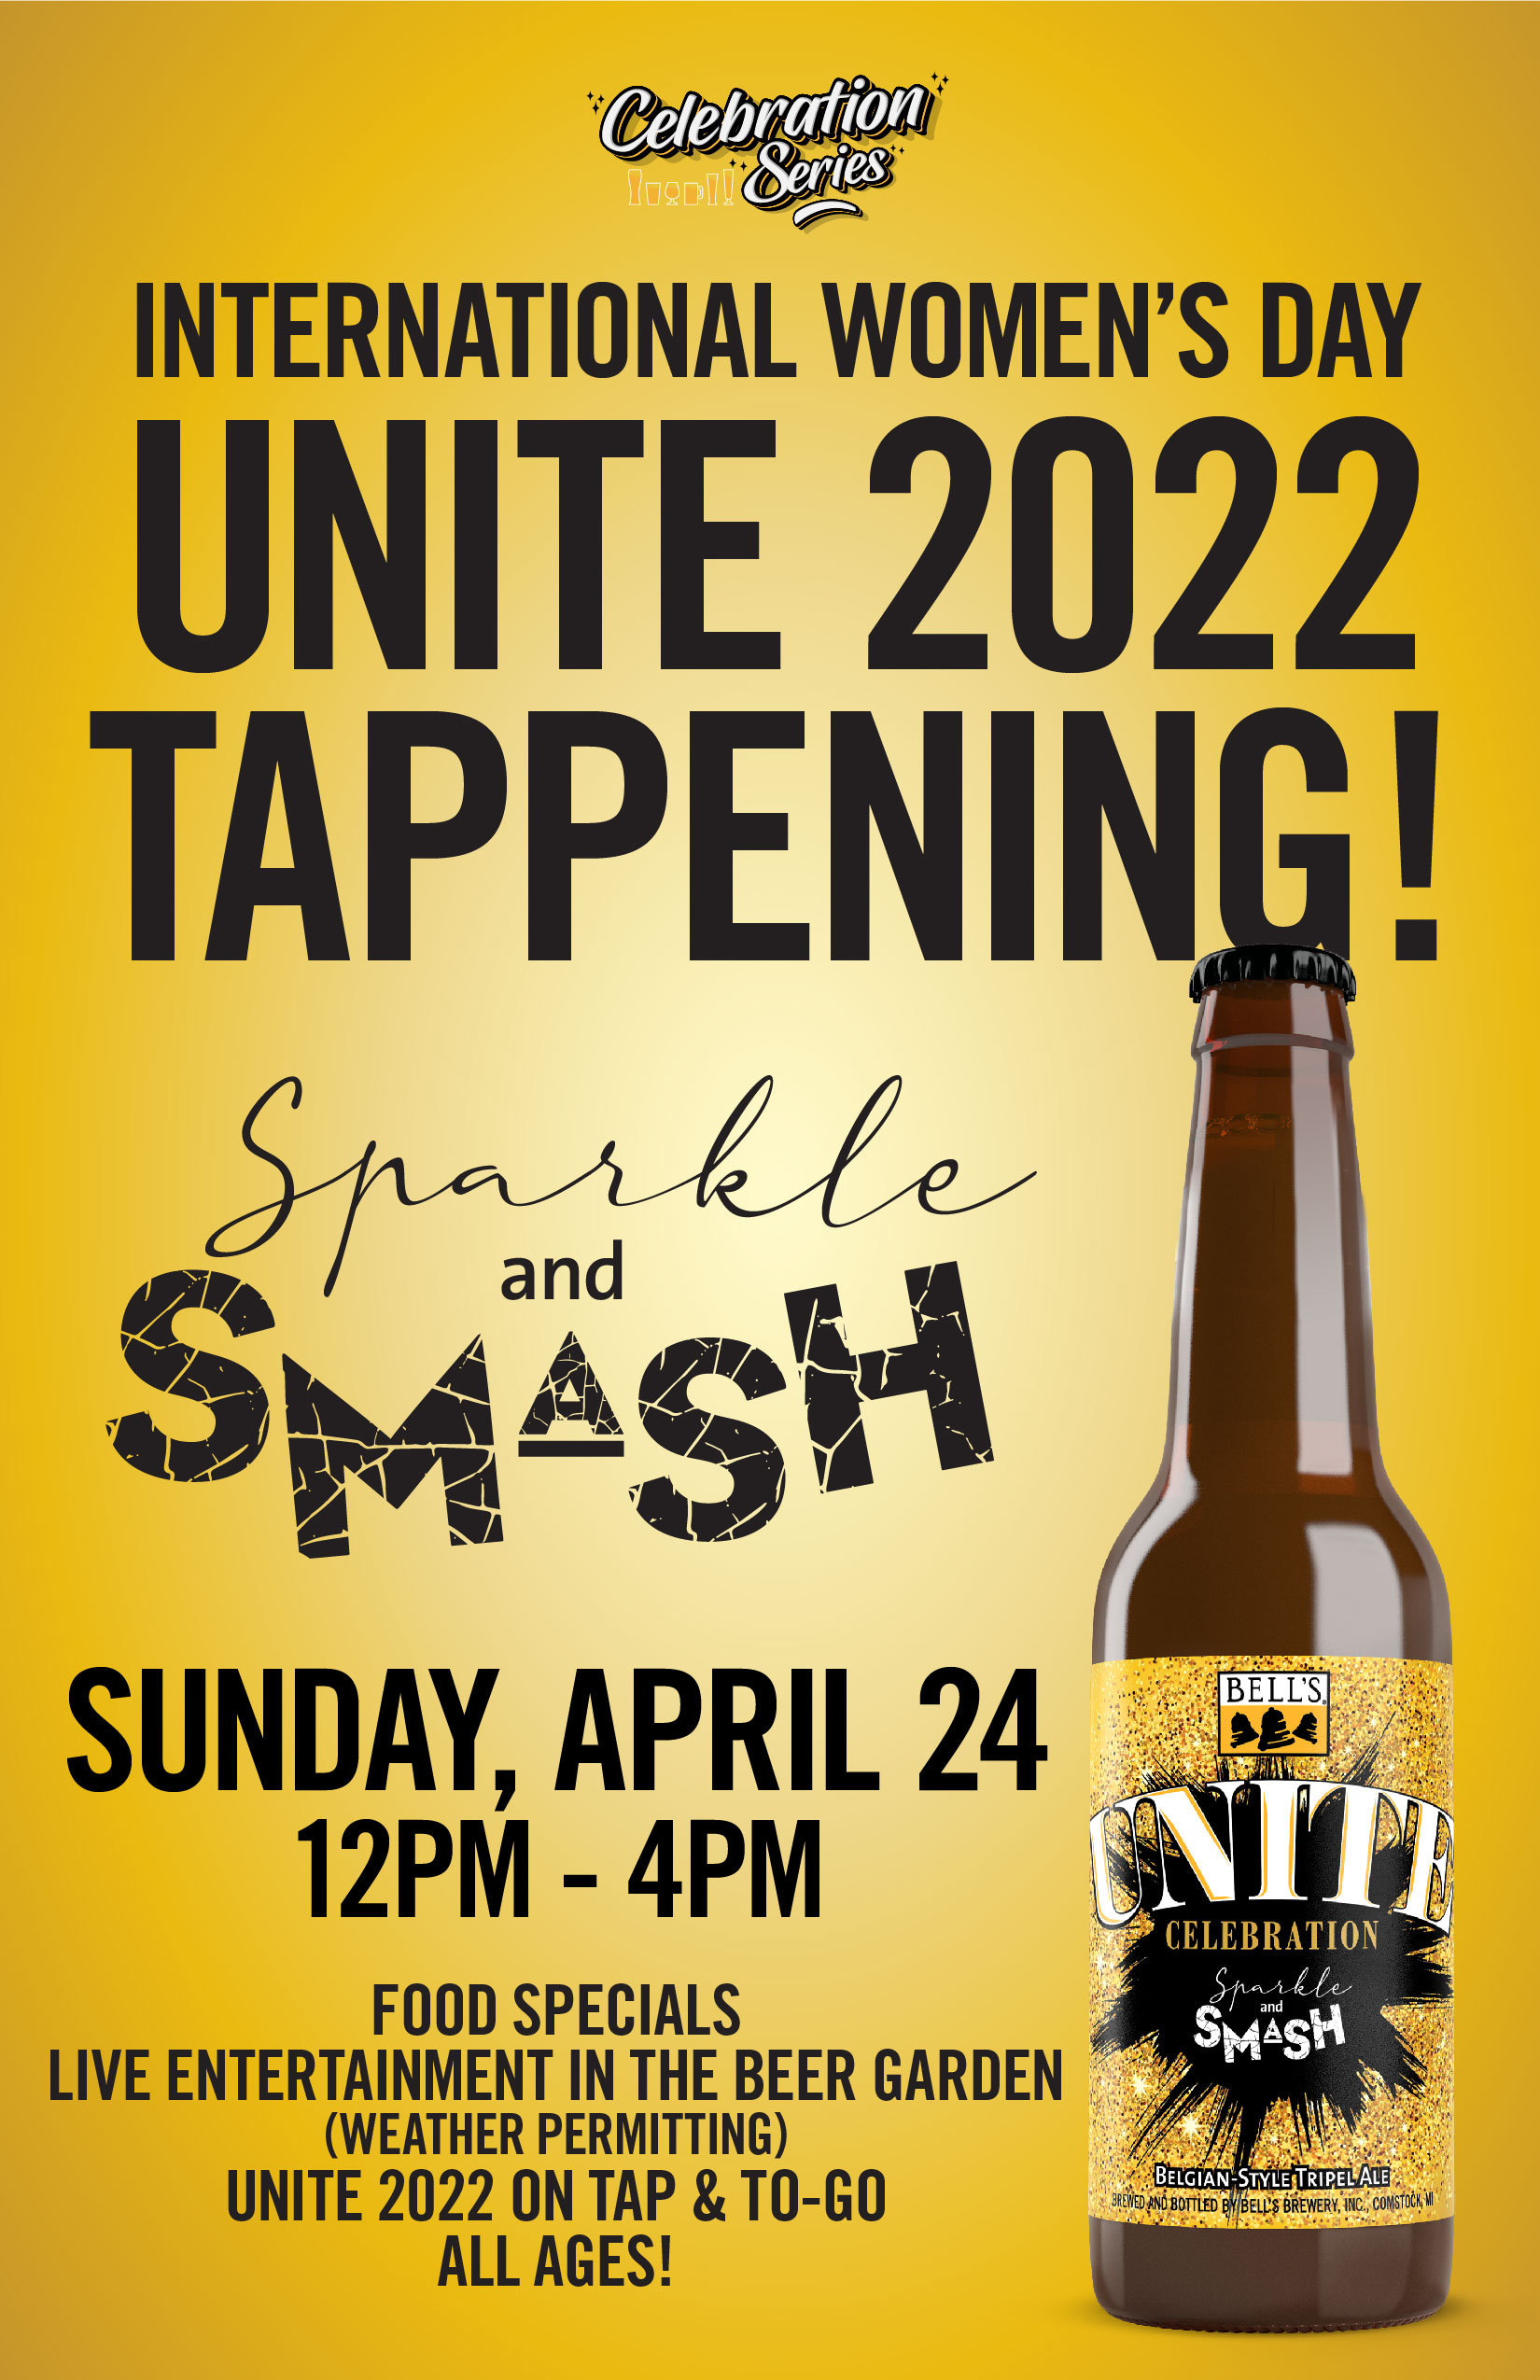 Poster for International Women's Day event at Bell's brewery featuring Unite 2022 Tappening.